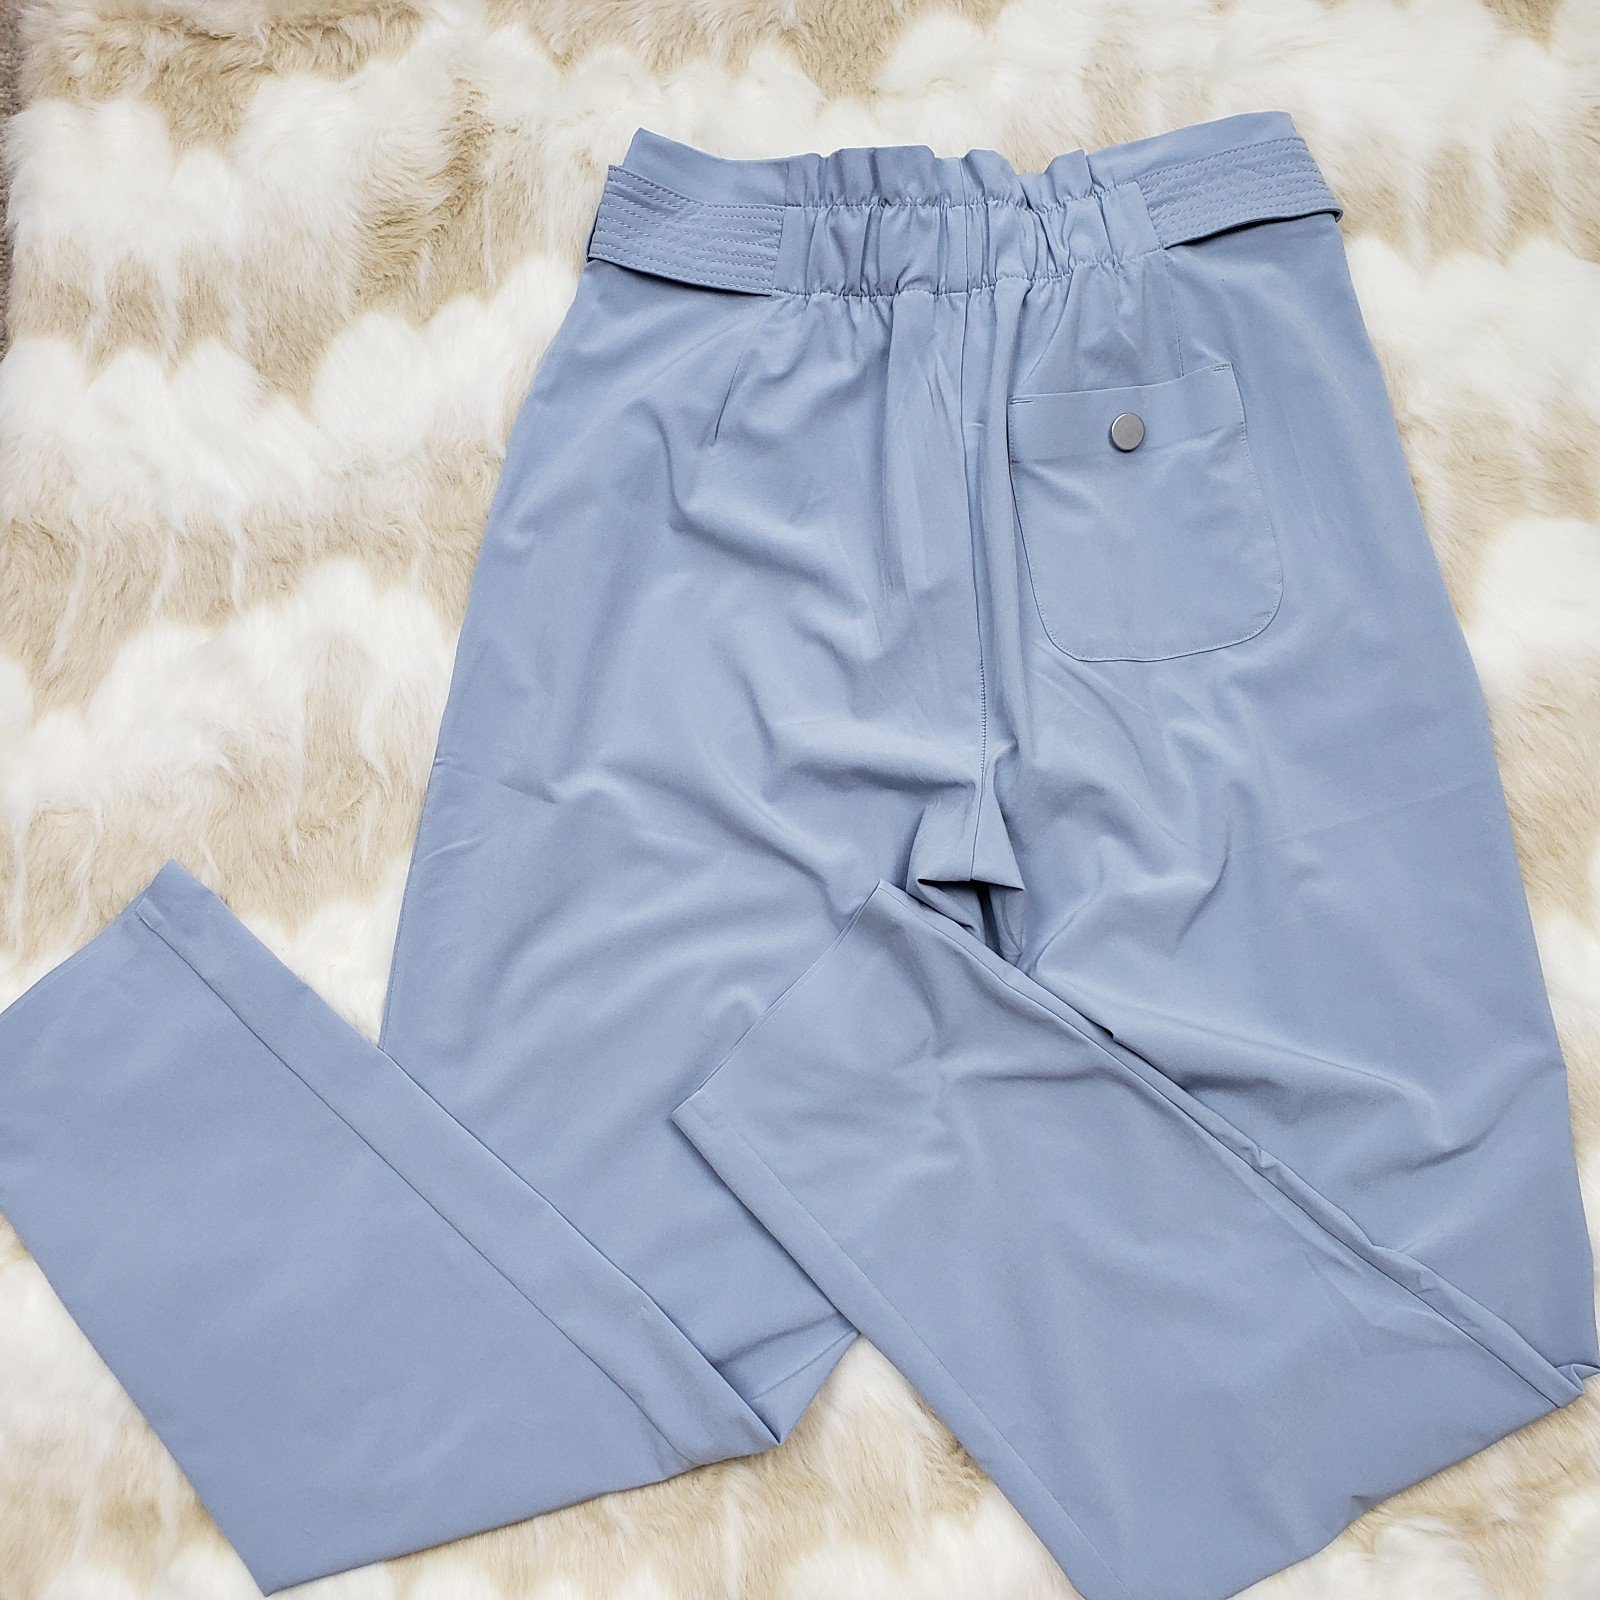 the Lowest price ♡ Athleta Skyline Pant II Size 0 Light Blue mTojsf3F5 Online Exclusive